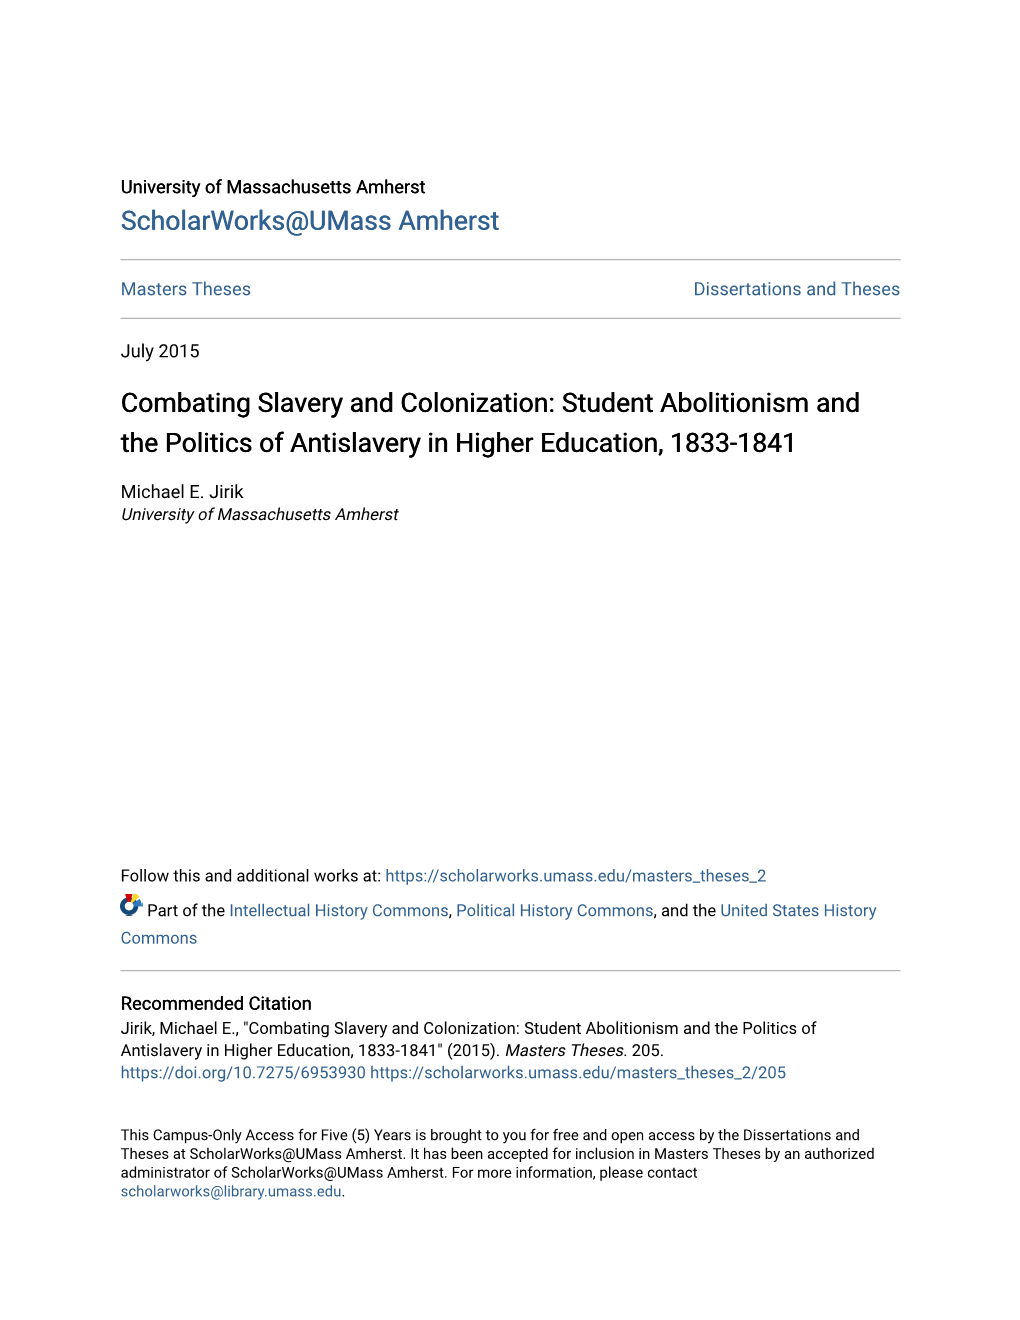 Combating Slavery and Colonization: Student Abolitionism and the Politics of Antislavery in Higher Education, 1833-1841